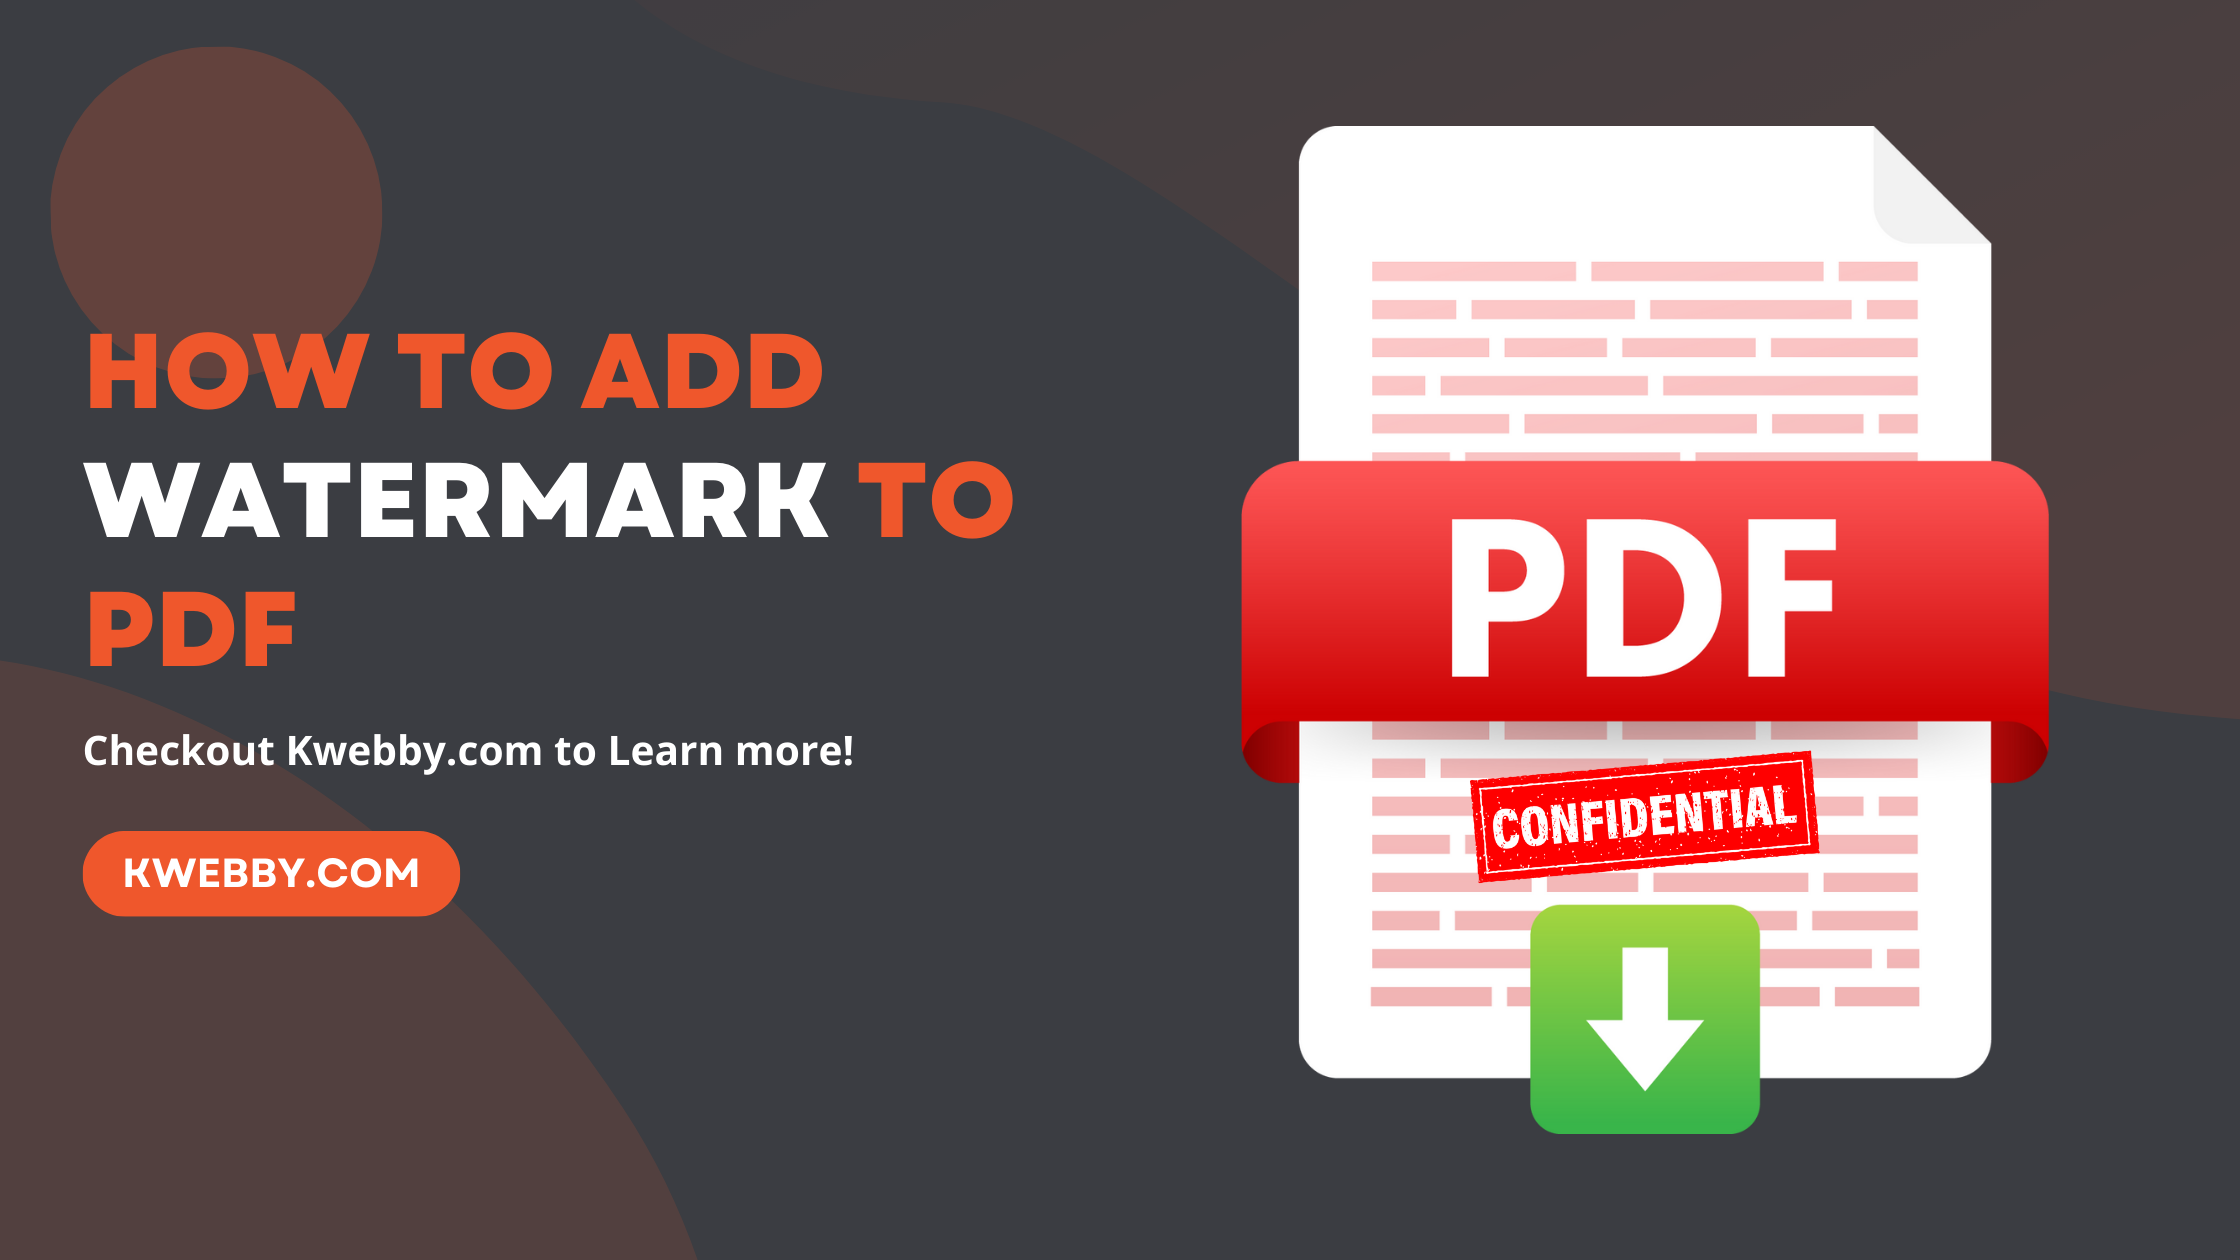 How to Add Watermark to PDF